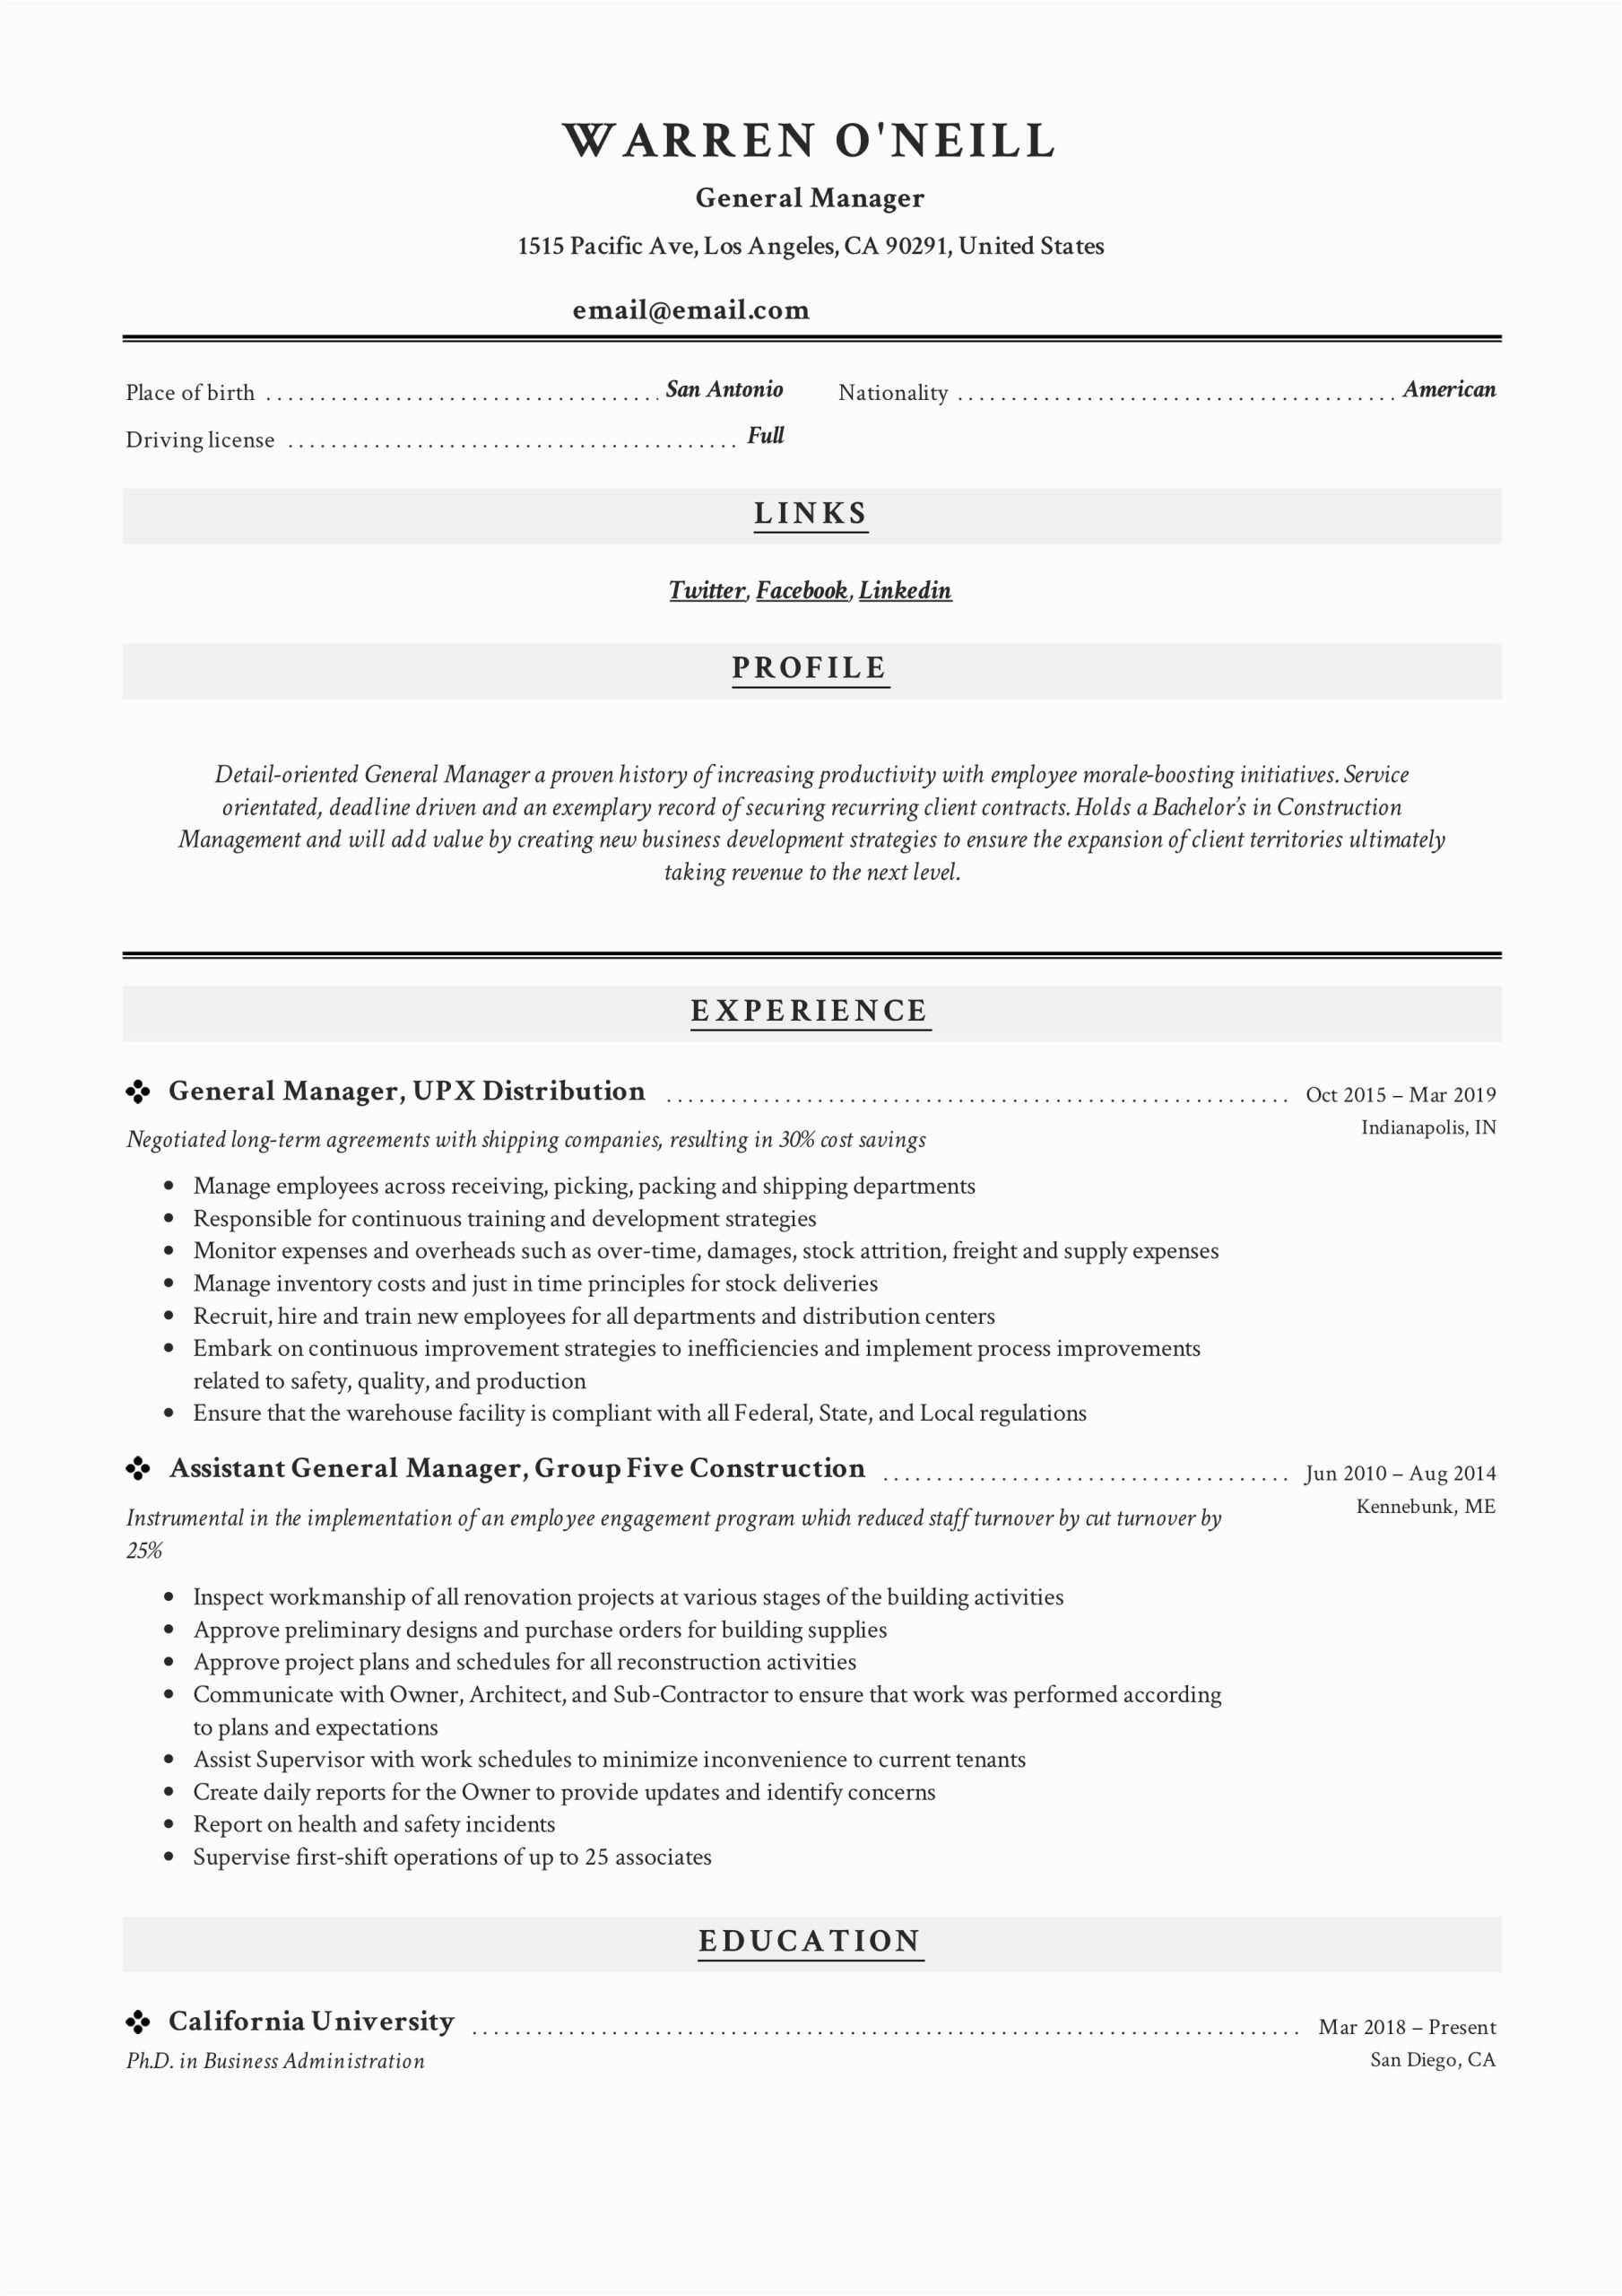 Sample Resume for A General Manager General Manager Resume & Writing Guide 12 Resume Examples